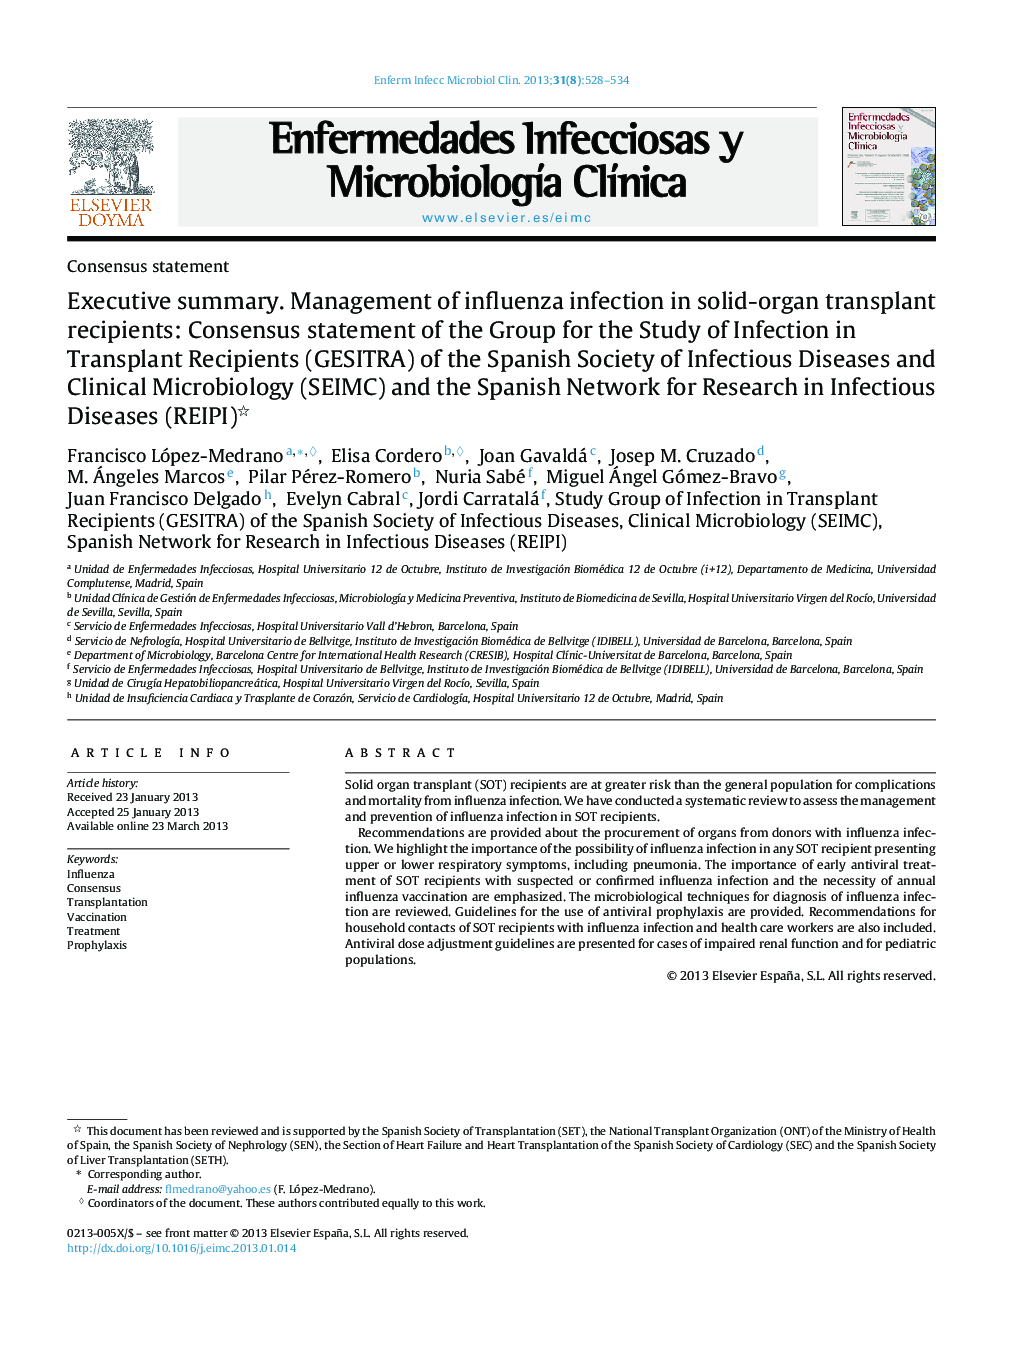 Executive summary. Management of influenza infection in solid-organ transplant recipients: Consensus statement of the Group for the Study of Infection in Transplant Recipients (GESITRA) of the Spanish Society of Infectious Diseases and Clinical Microbiolo